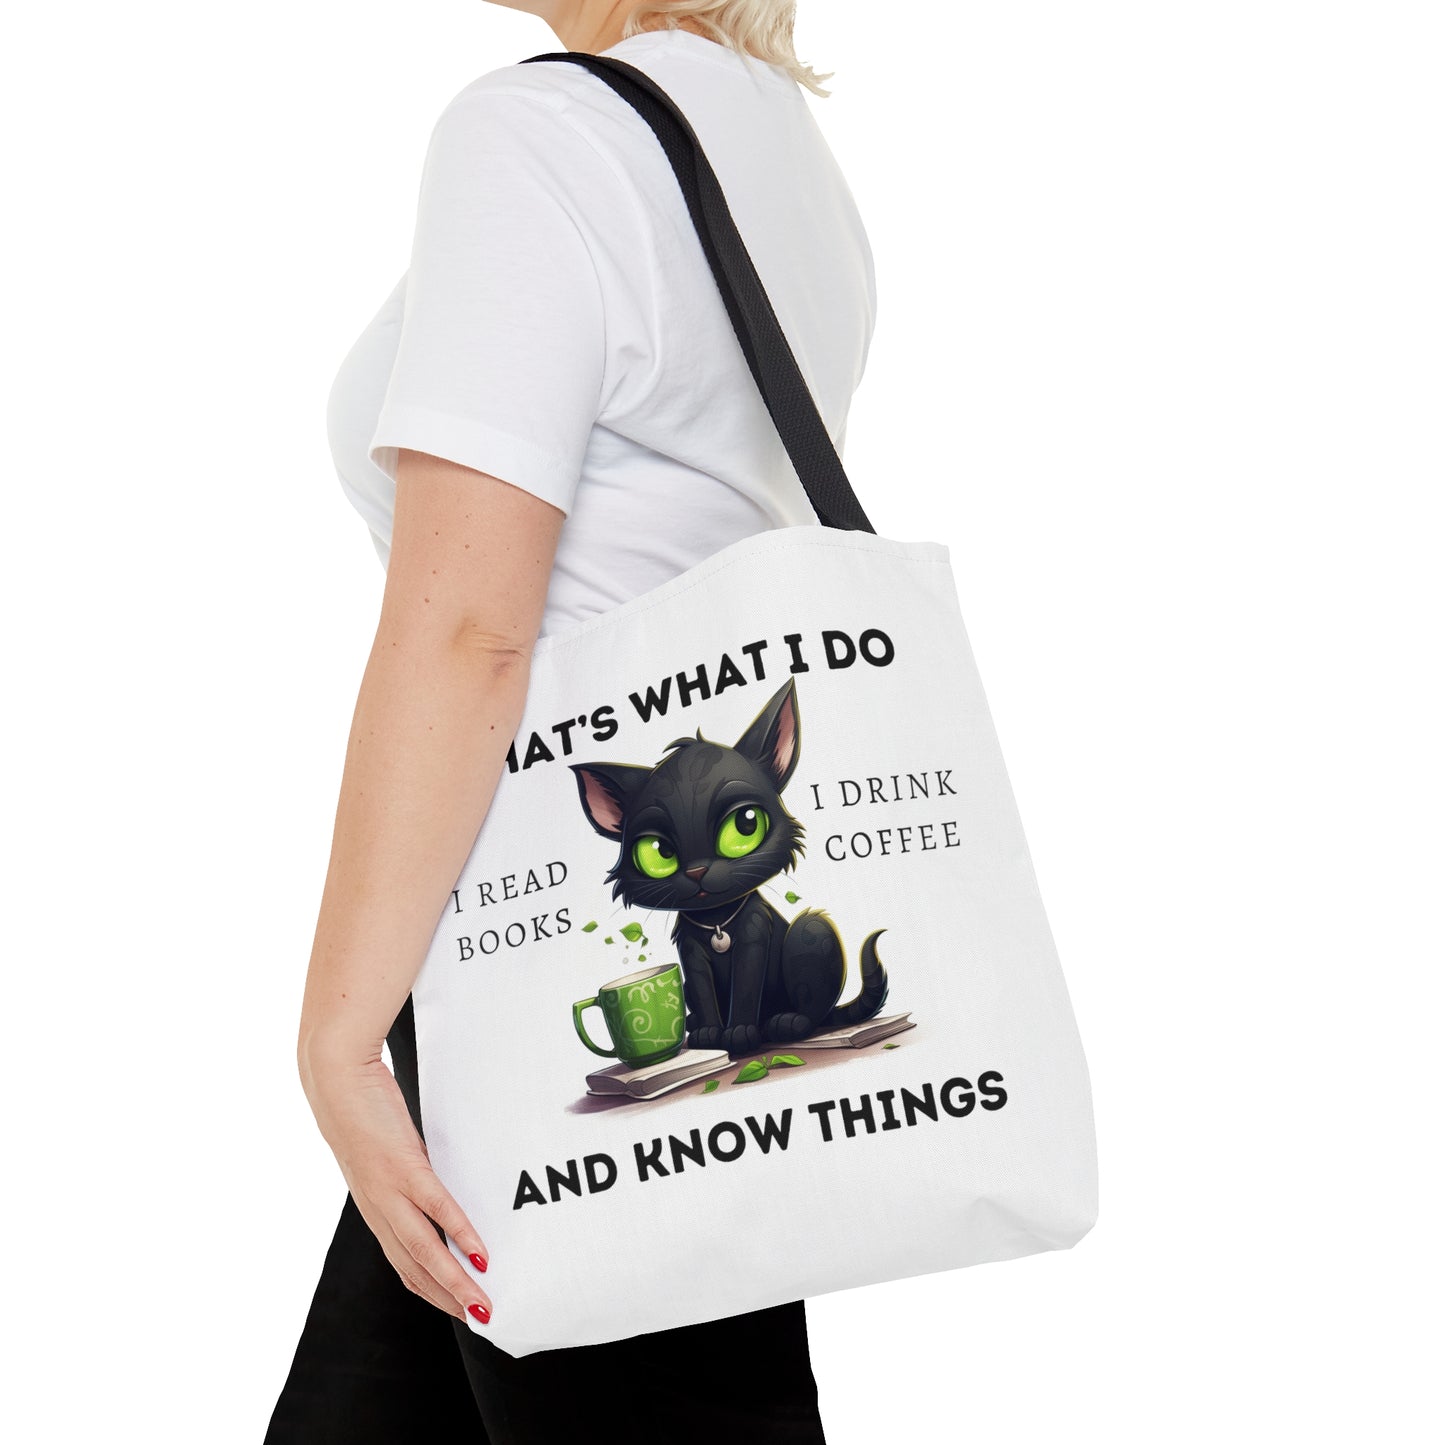 Tote Bag - That’s What I Do